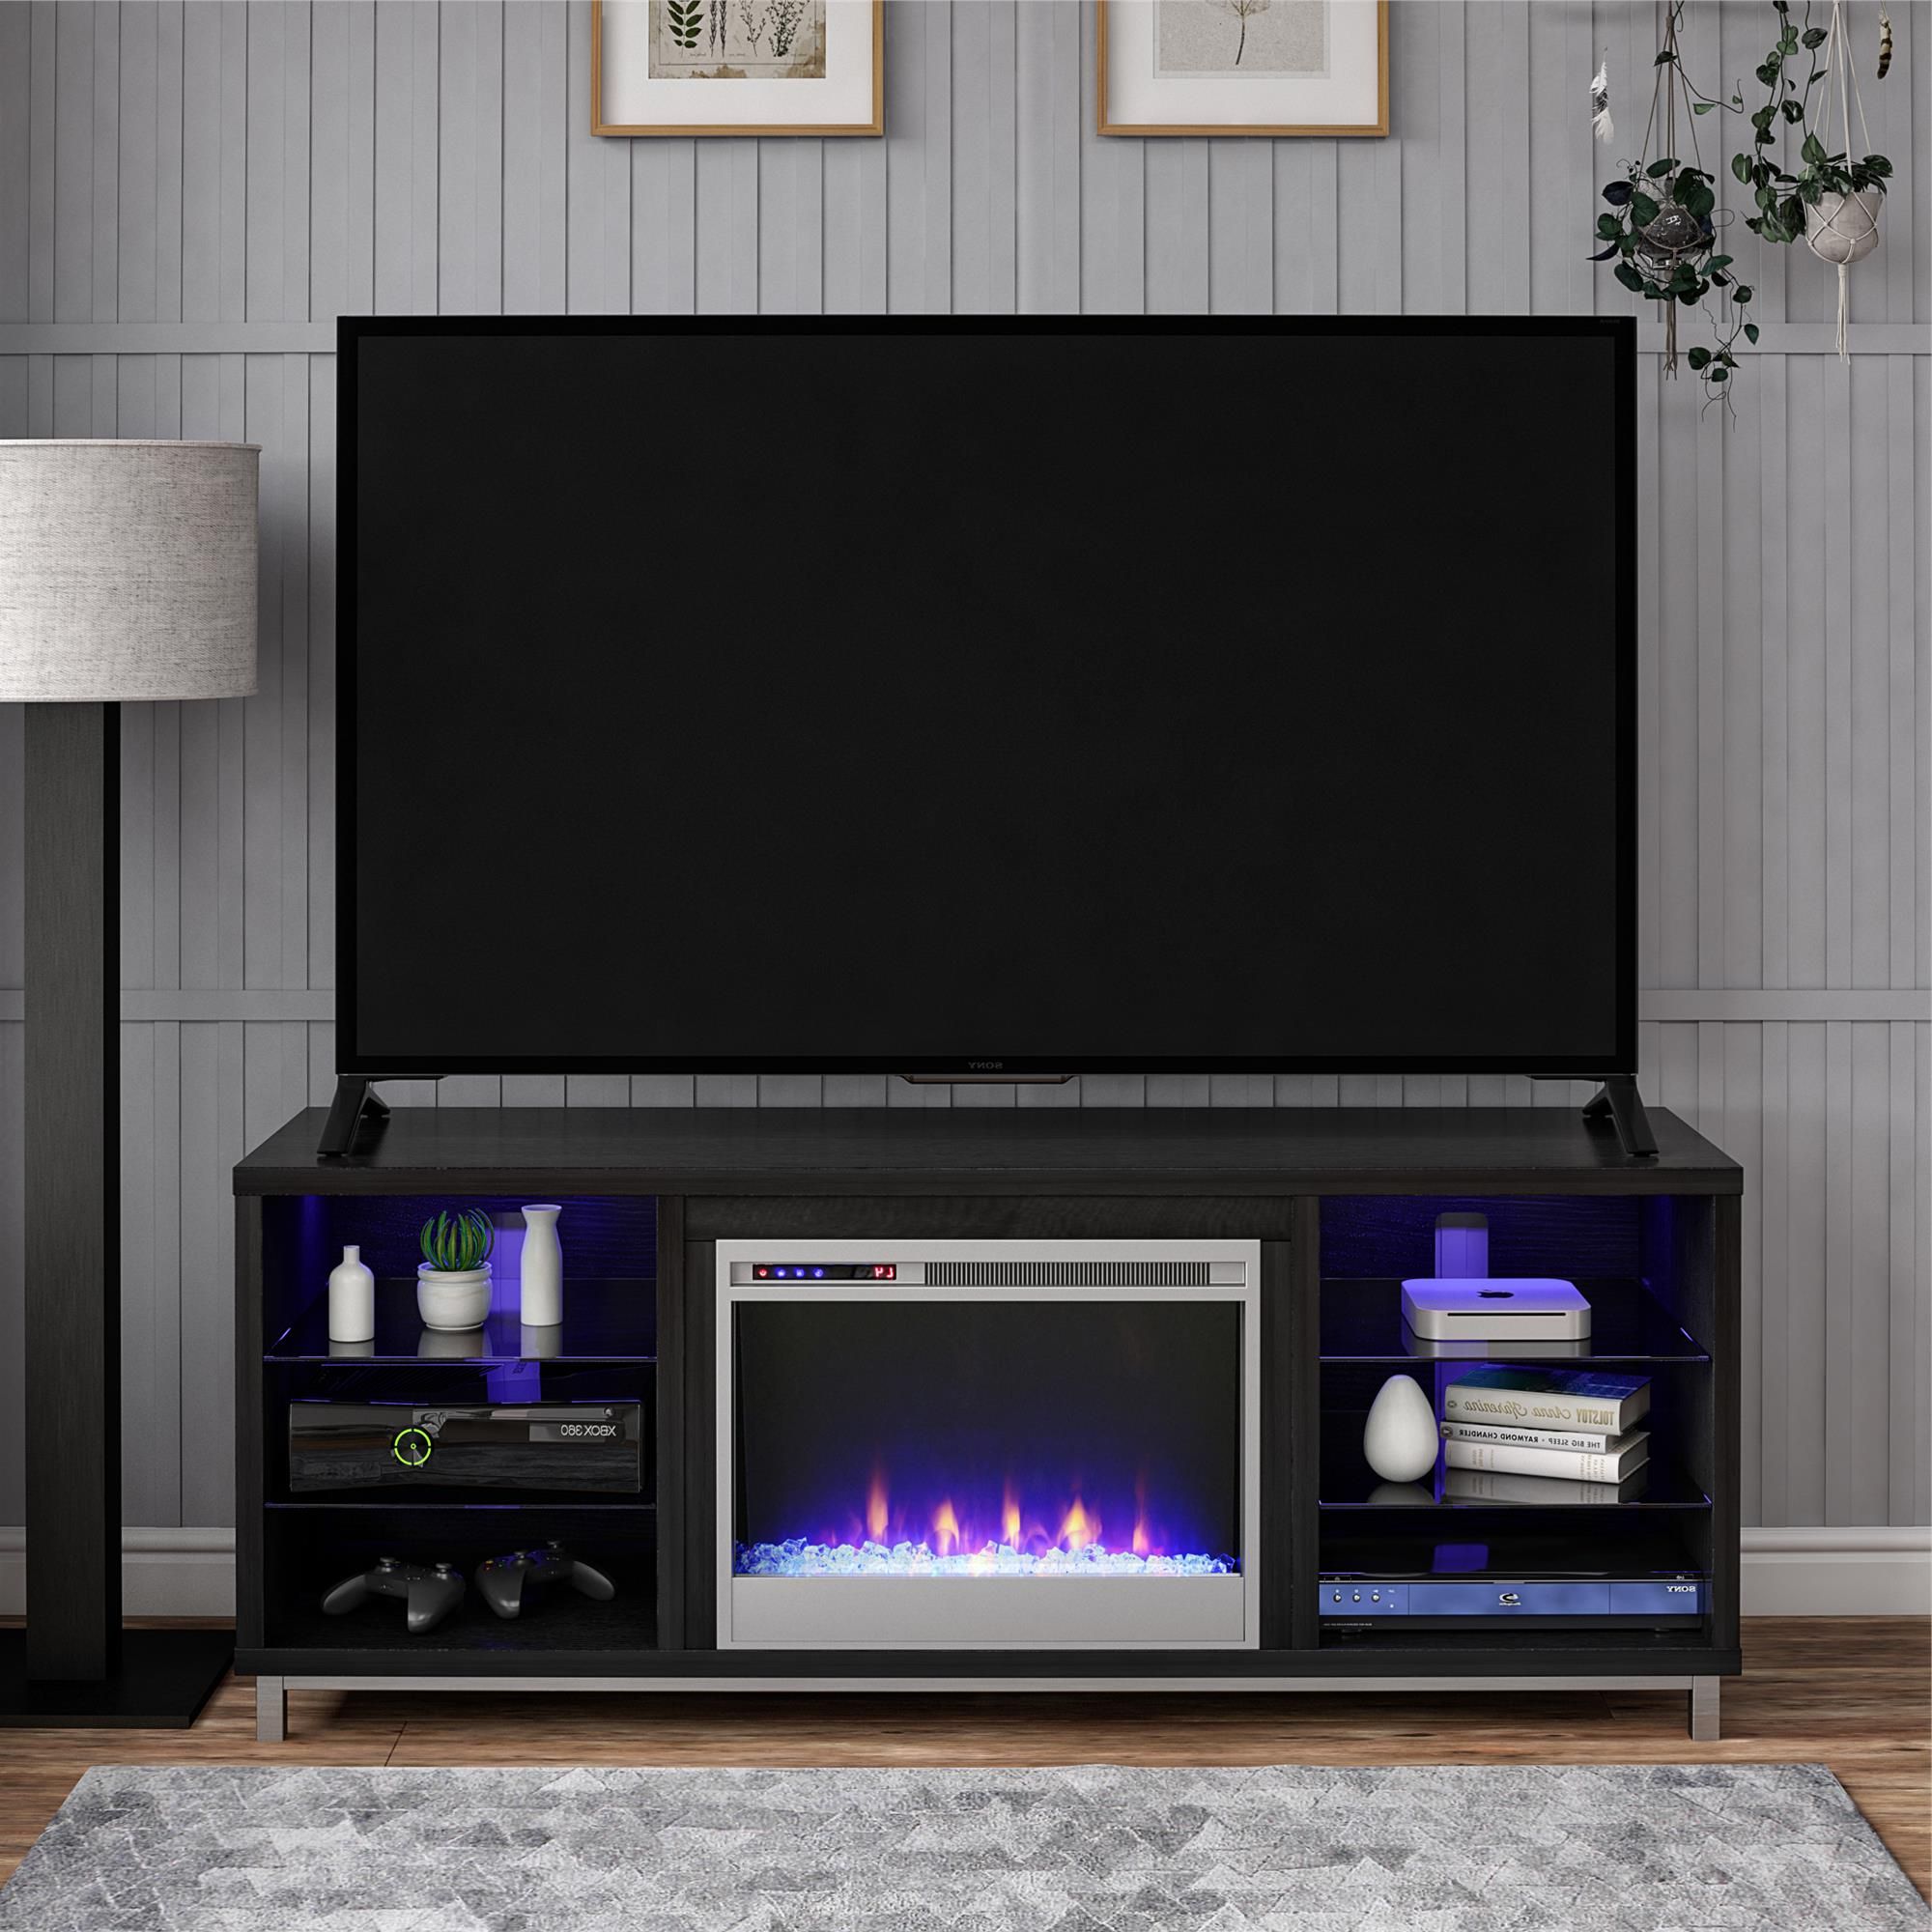 Ameriwood Home Lumina Fireplace Tv Stand For Tvs Up To 70 Pertaining To Most Current Glass Tv Stands For Tvs Up To 70" (View 3 of 10)